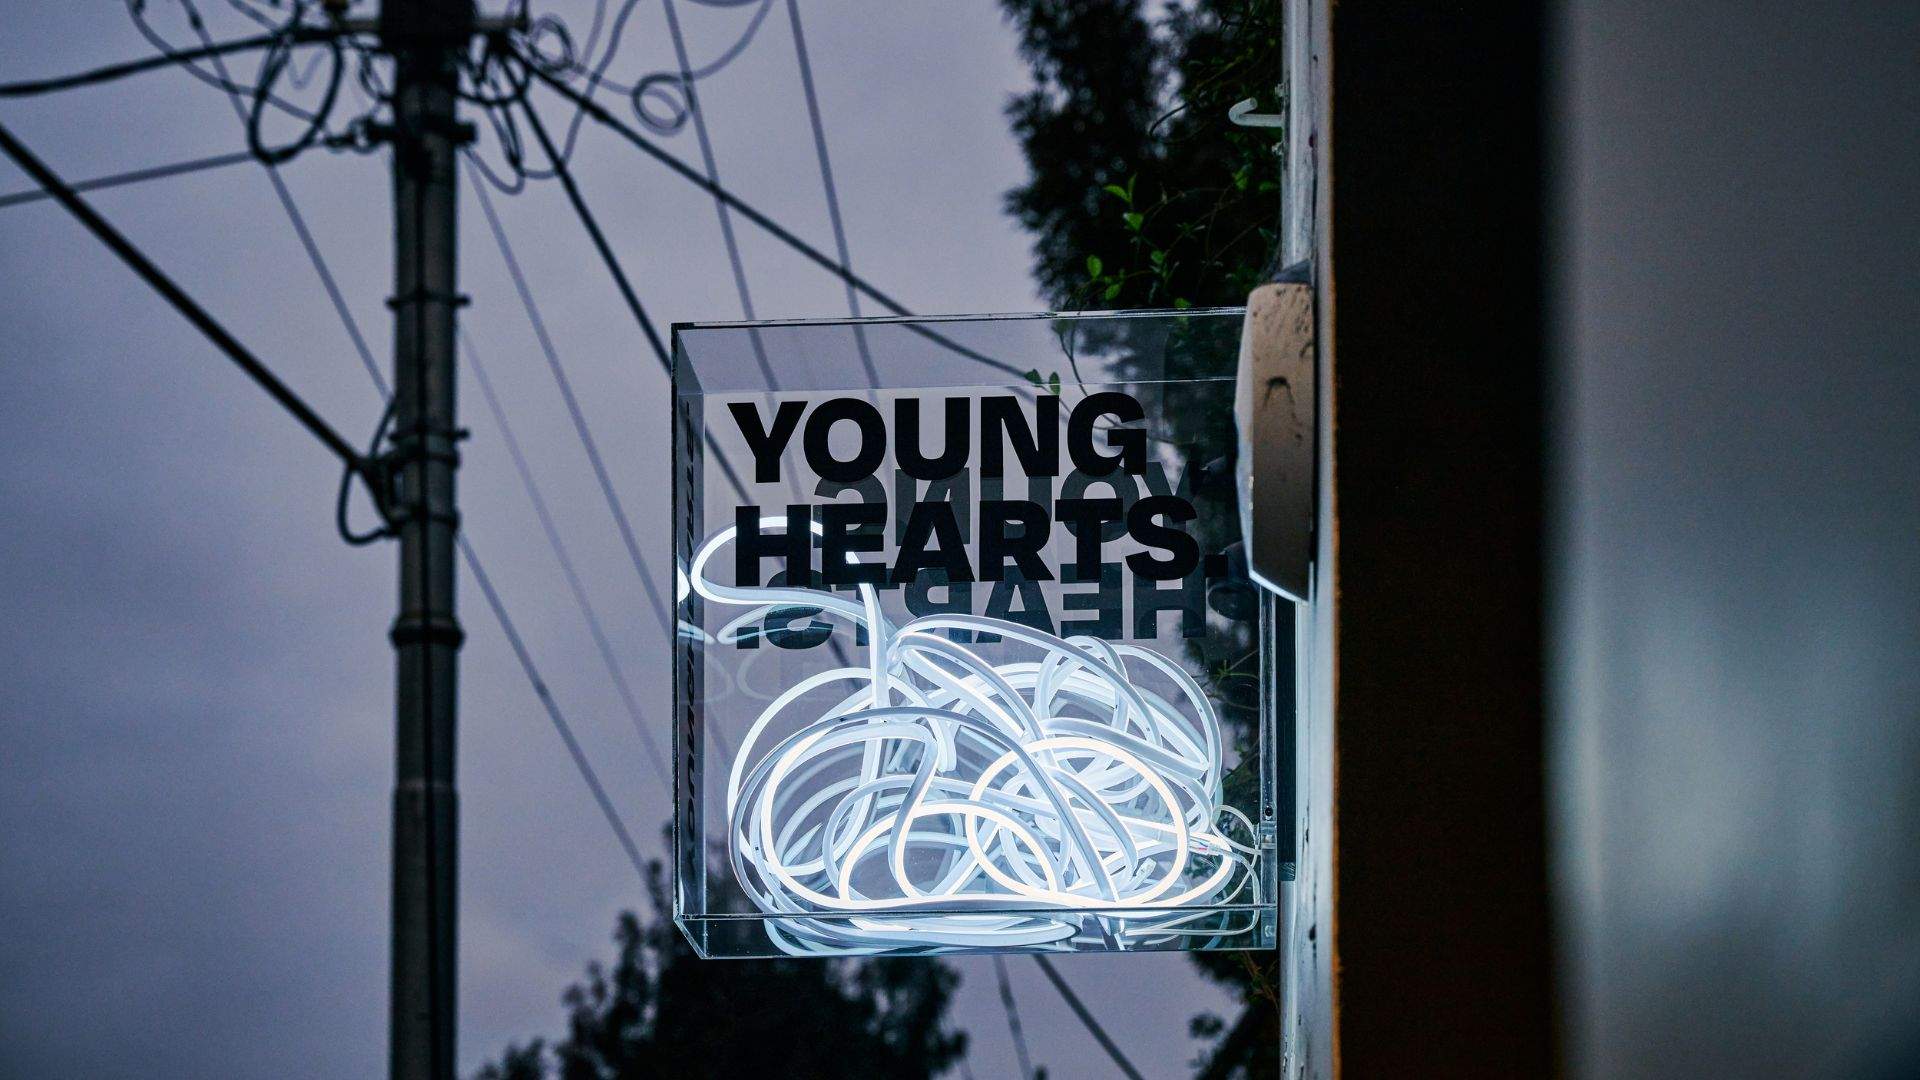 Now Open: Young Hearts Has Brought an Ever-Evolving Offering of Eats, Drinks and Tunes to Windsor